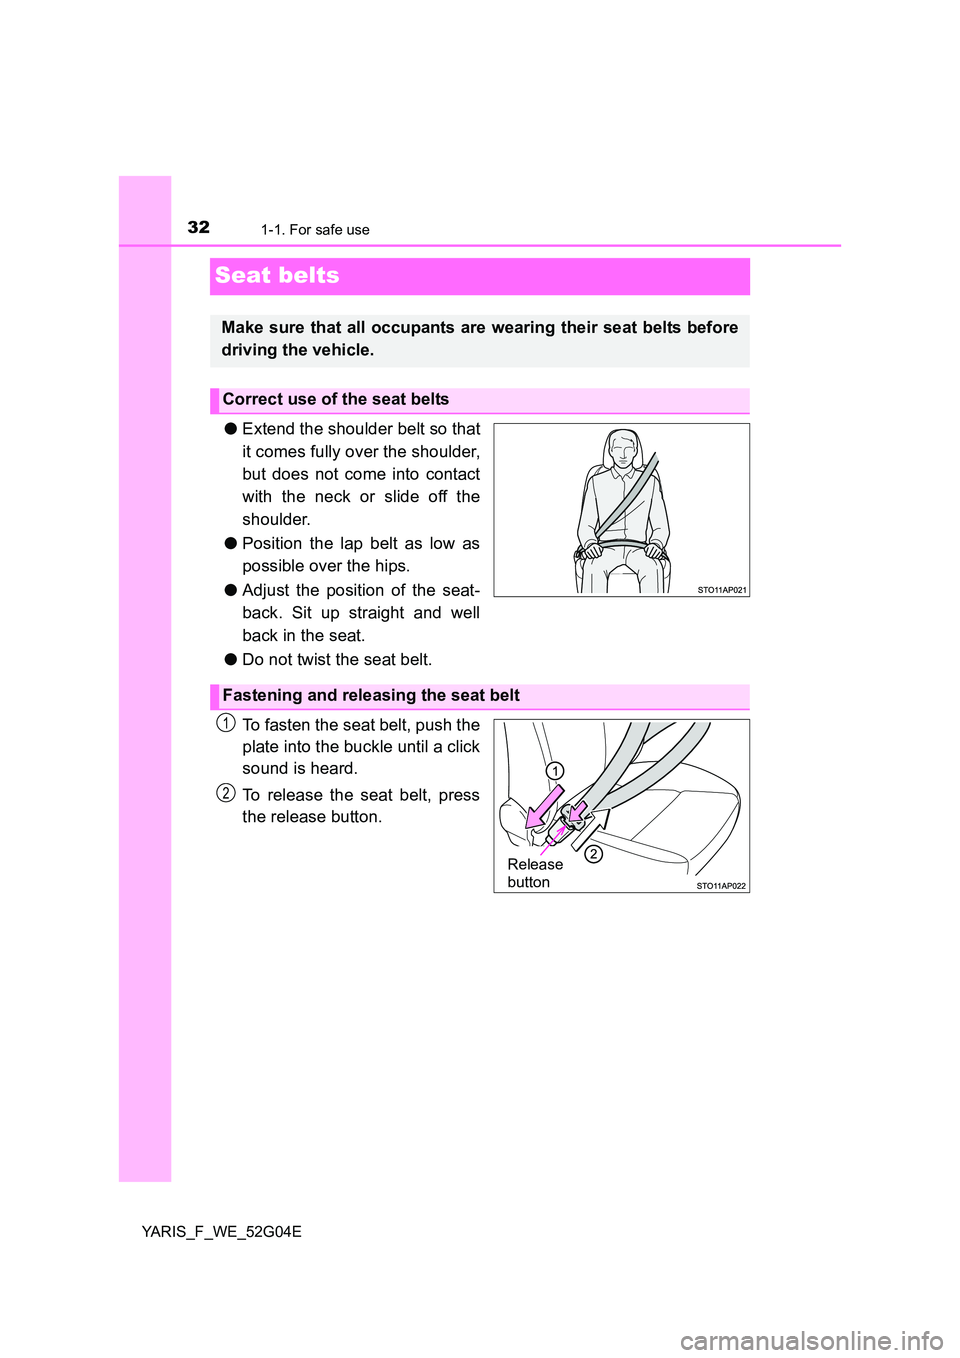 TOYOTA YARIS 2016  Owners Manual 321-1. For safe use
YARIS_F_WE_52G04E
Seat belts
●Extend the shoulder belt so that 
it comes fully over the shoulder, 
but does not come into contact 
with the neck or slide off the
shoulder. 
● P